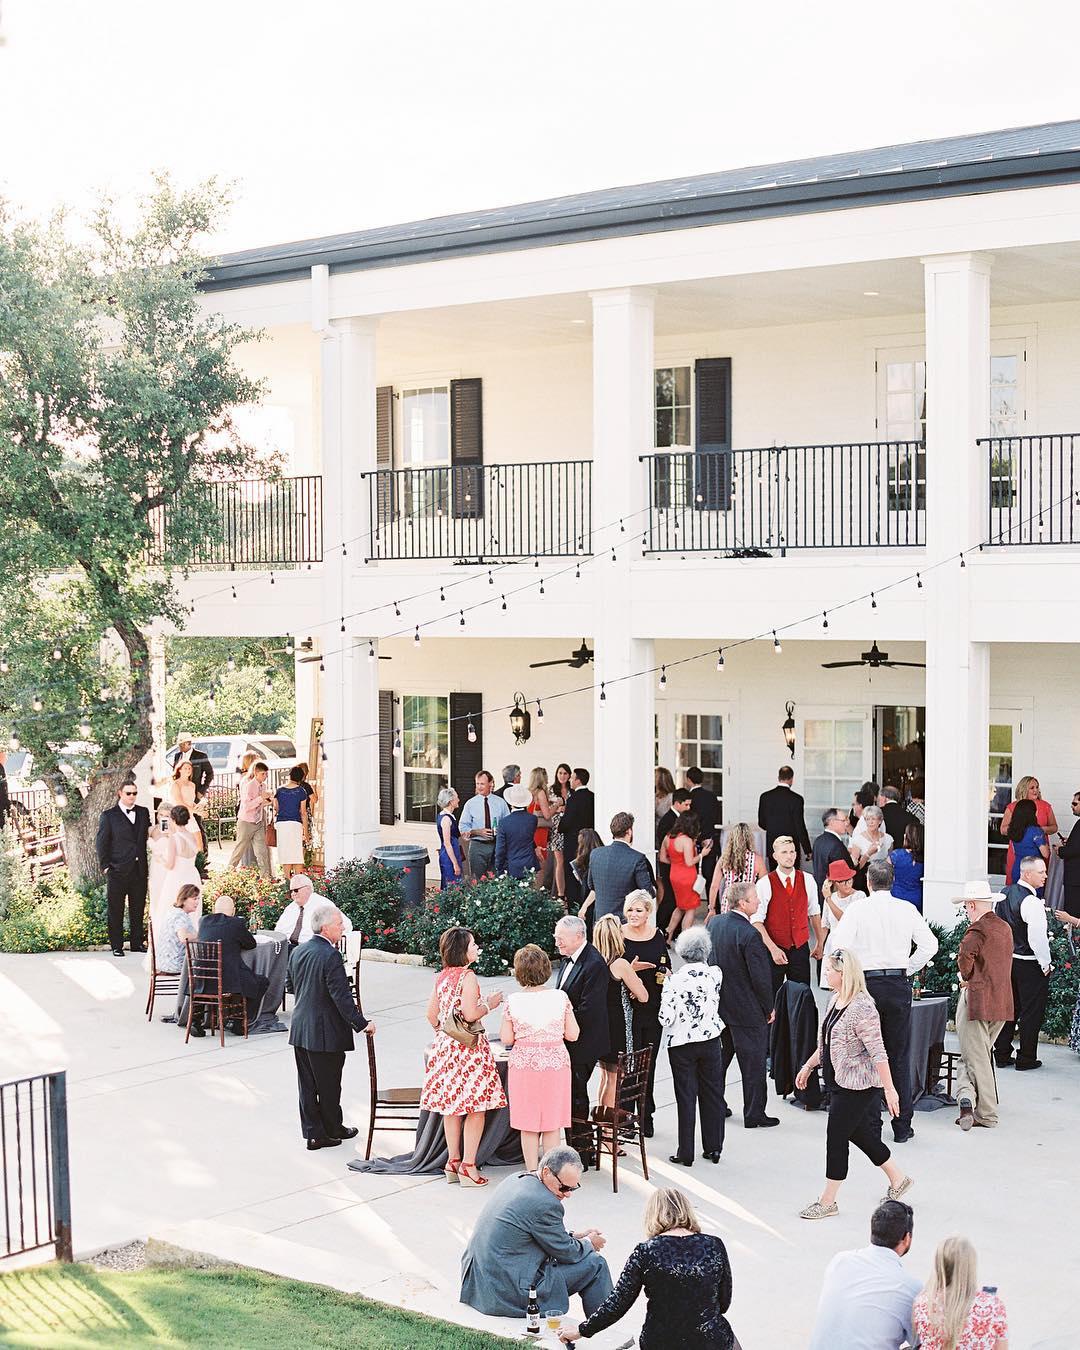 The Most Gorgeous Wedding Venues In The Texas Hill Country